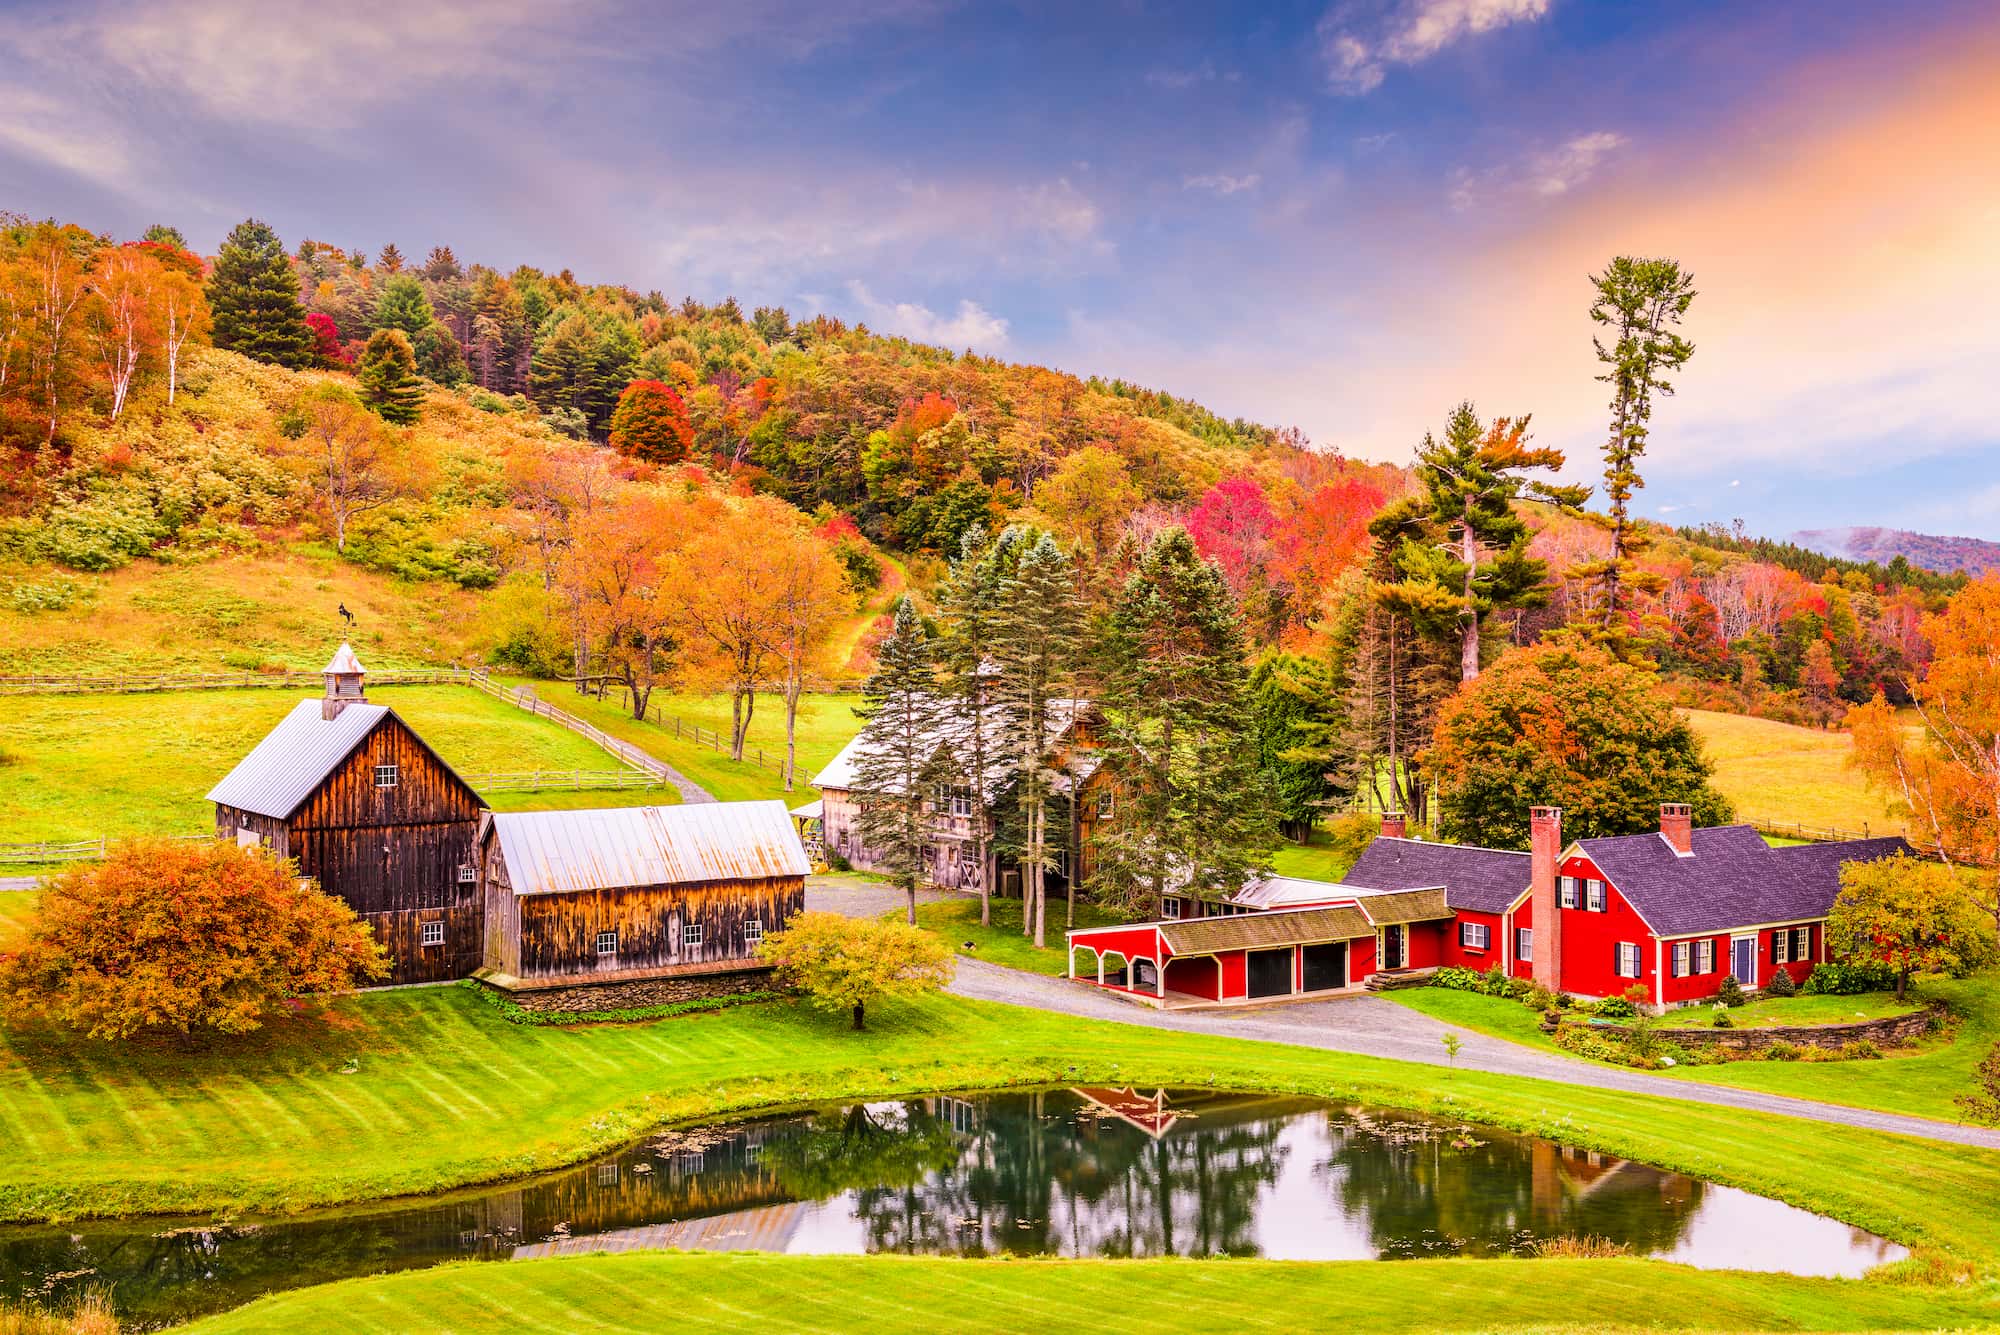 Panoramic view of red barn and old house with colorful trees in background